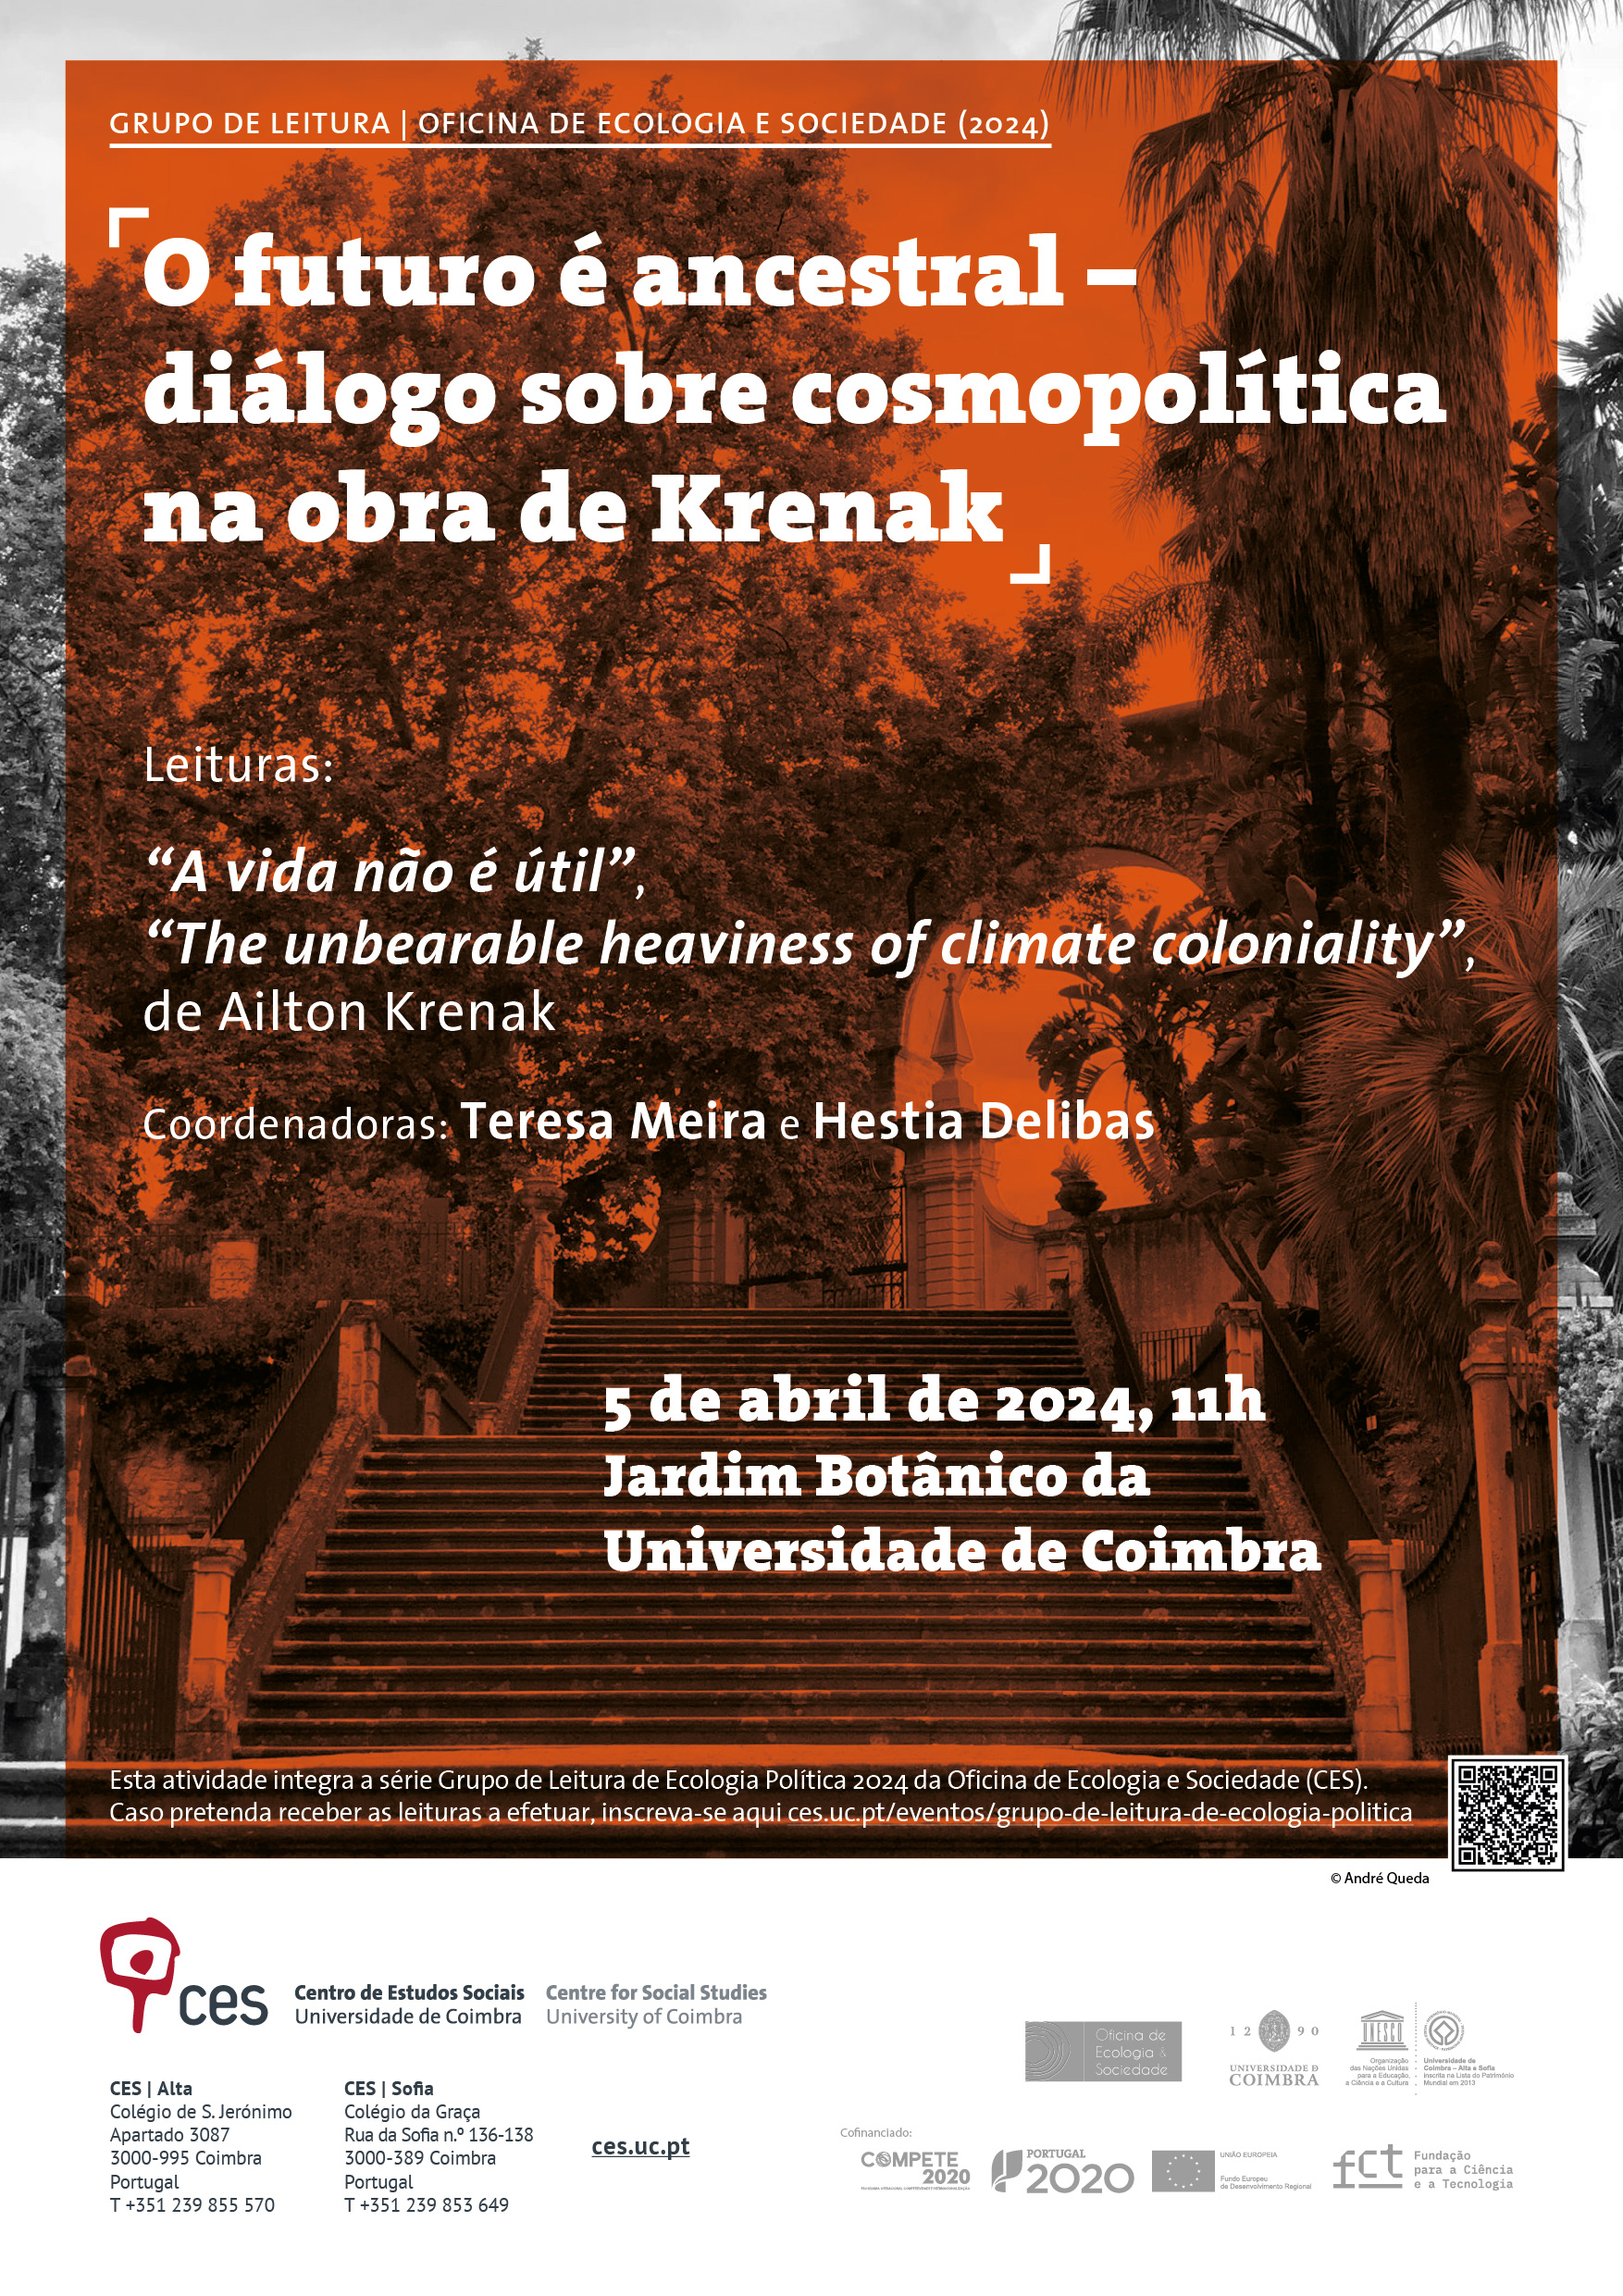 April: The future is ancestral - dialogue on cosmopolitics in Krenak's work<span id="edit_44823"><script>$(function() { $('#edit_44823').load( "/myces/user/editobj.php?tipo=evento&id=44823" ); });</script></span>